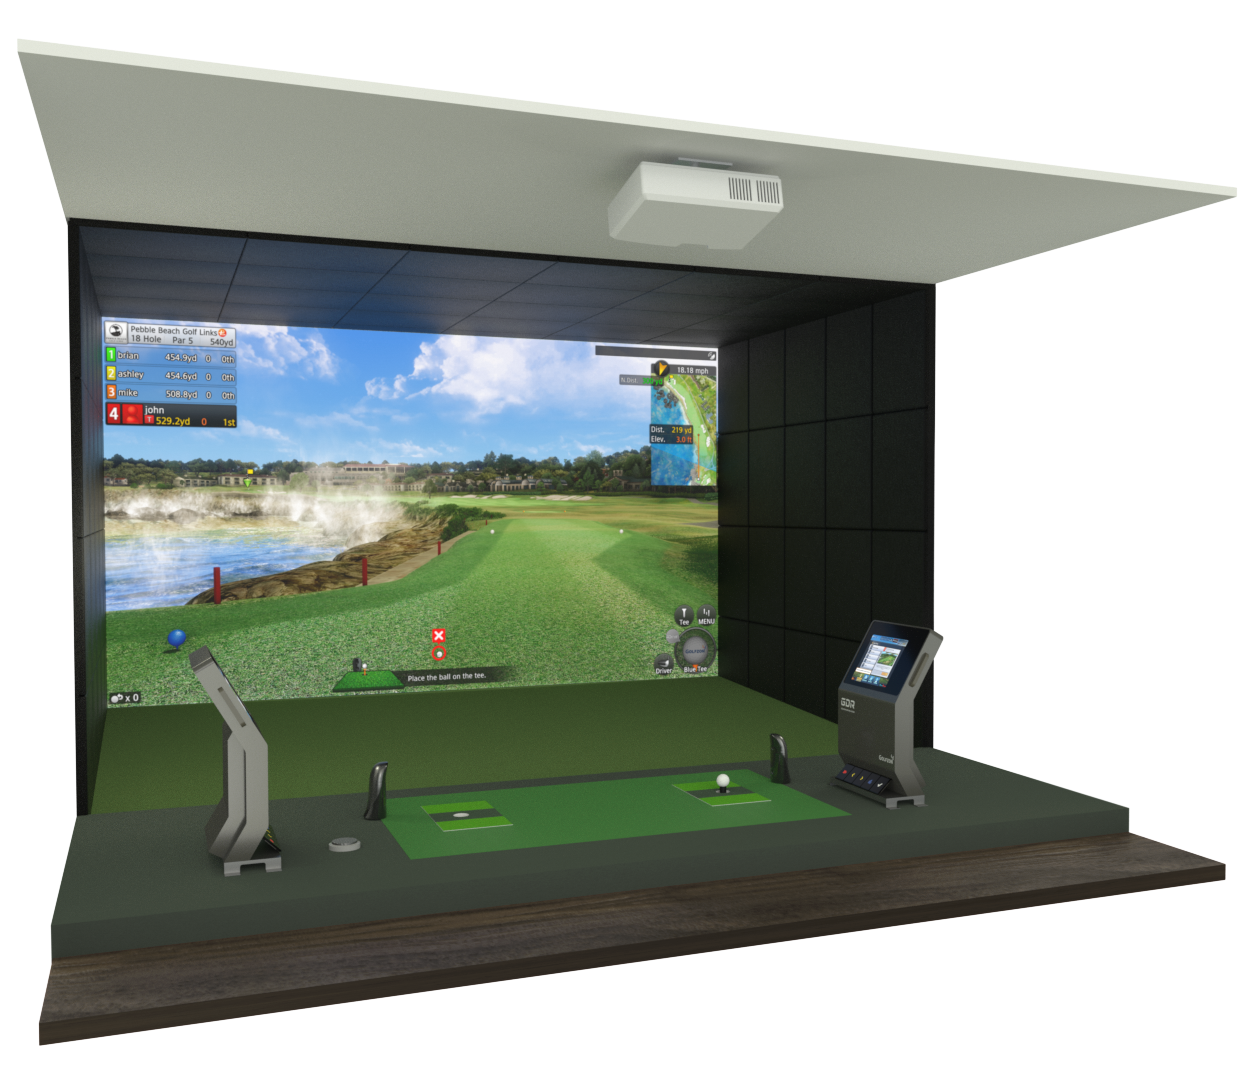 a close-up of the indoor golf simulator Golfzon Vision Standard including the projector